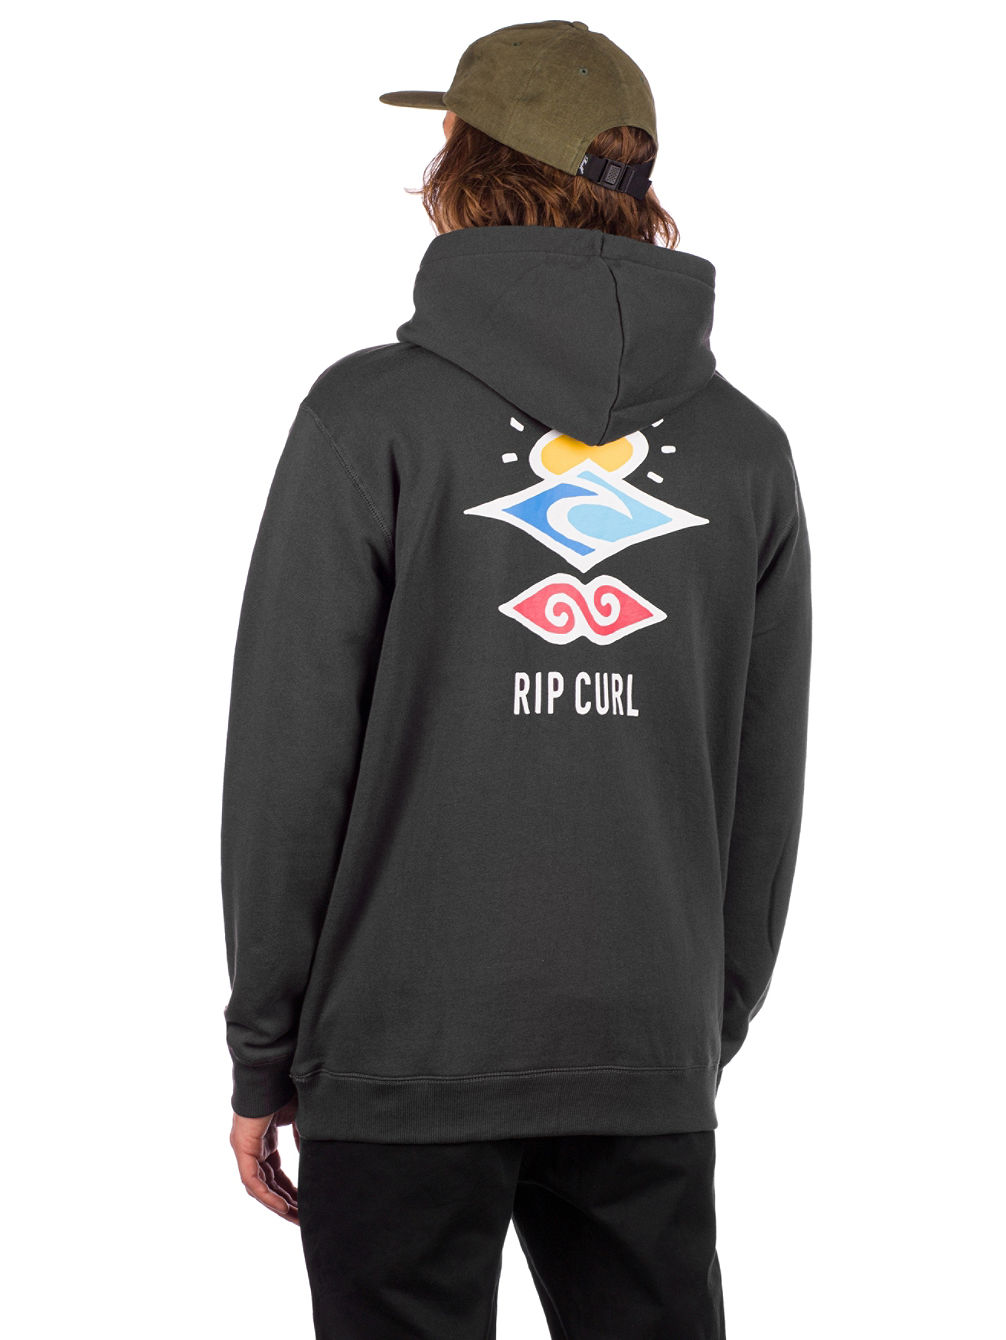 Search Icon Hoodie